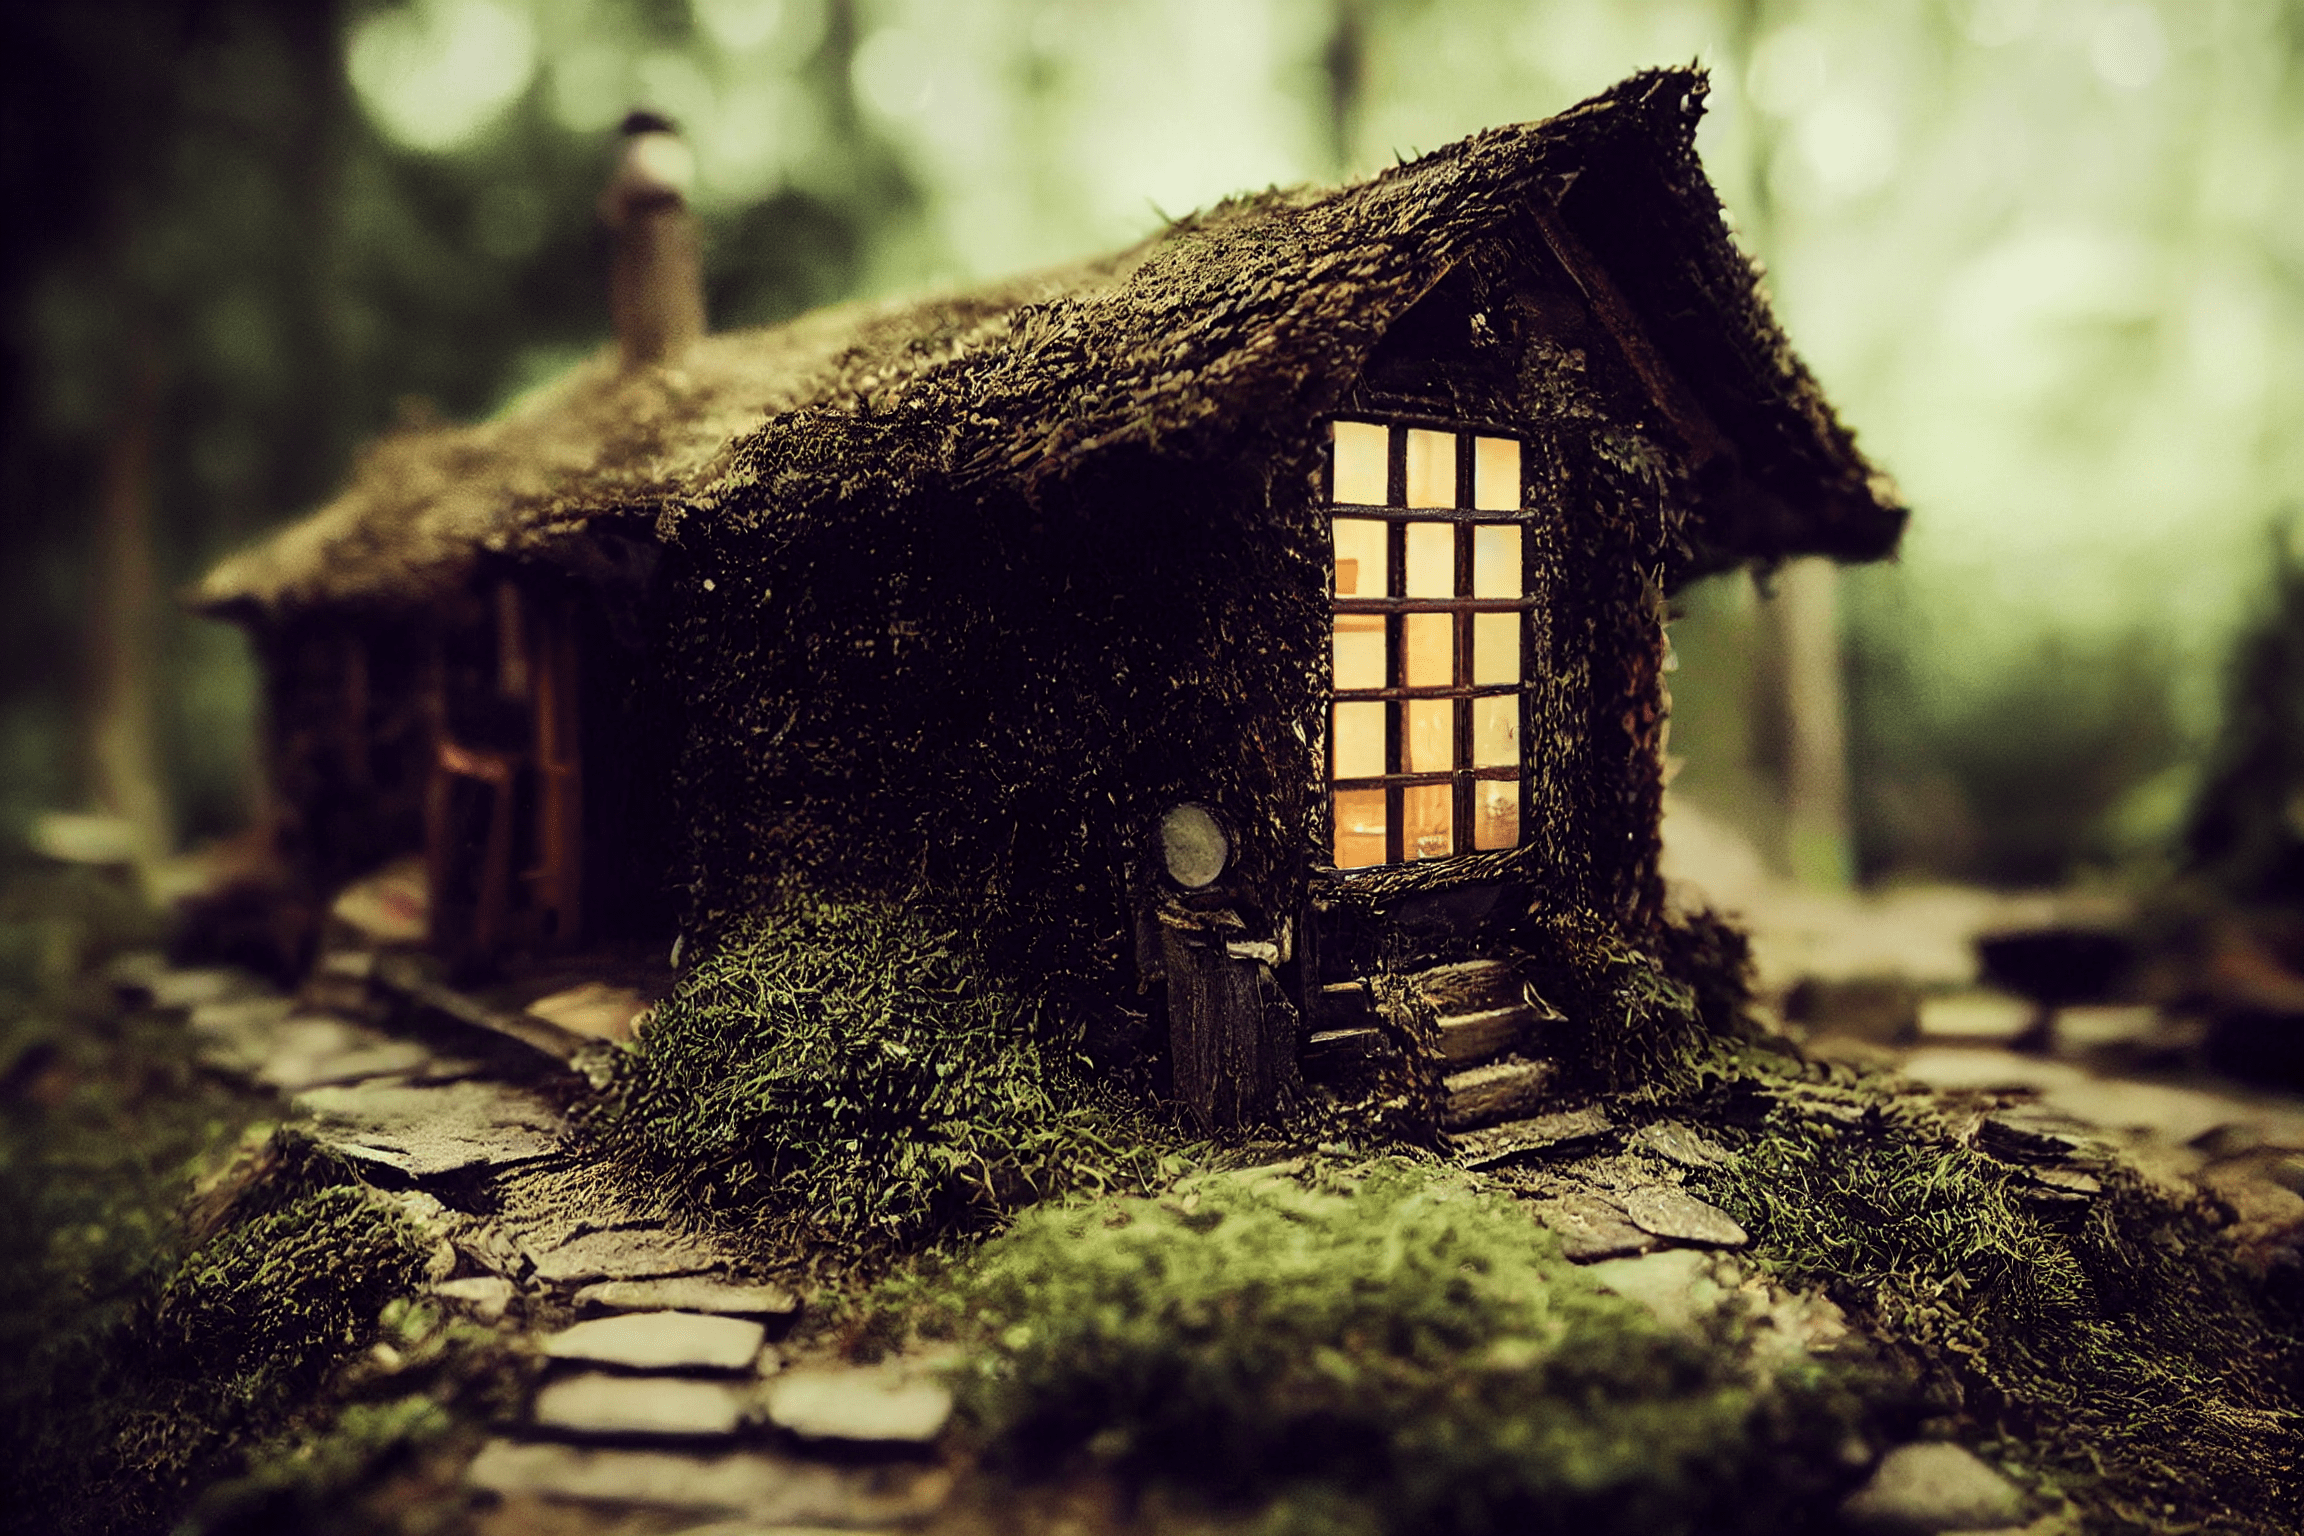 Way back a year ago – Cabincore miniature mossy cabin